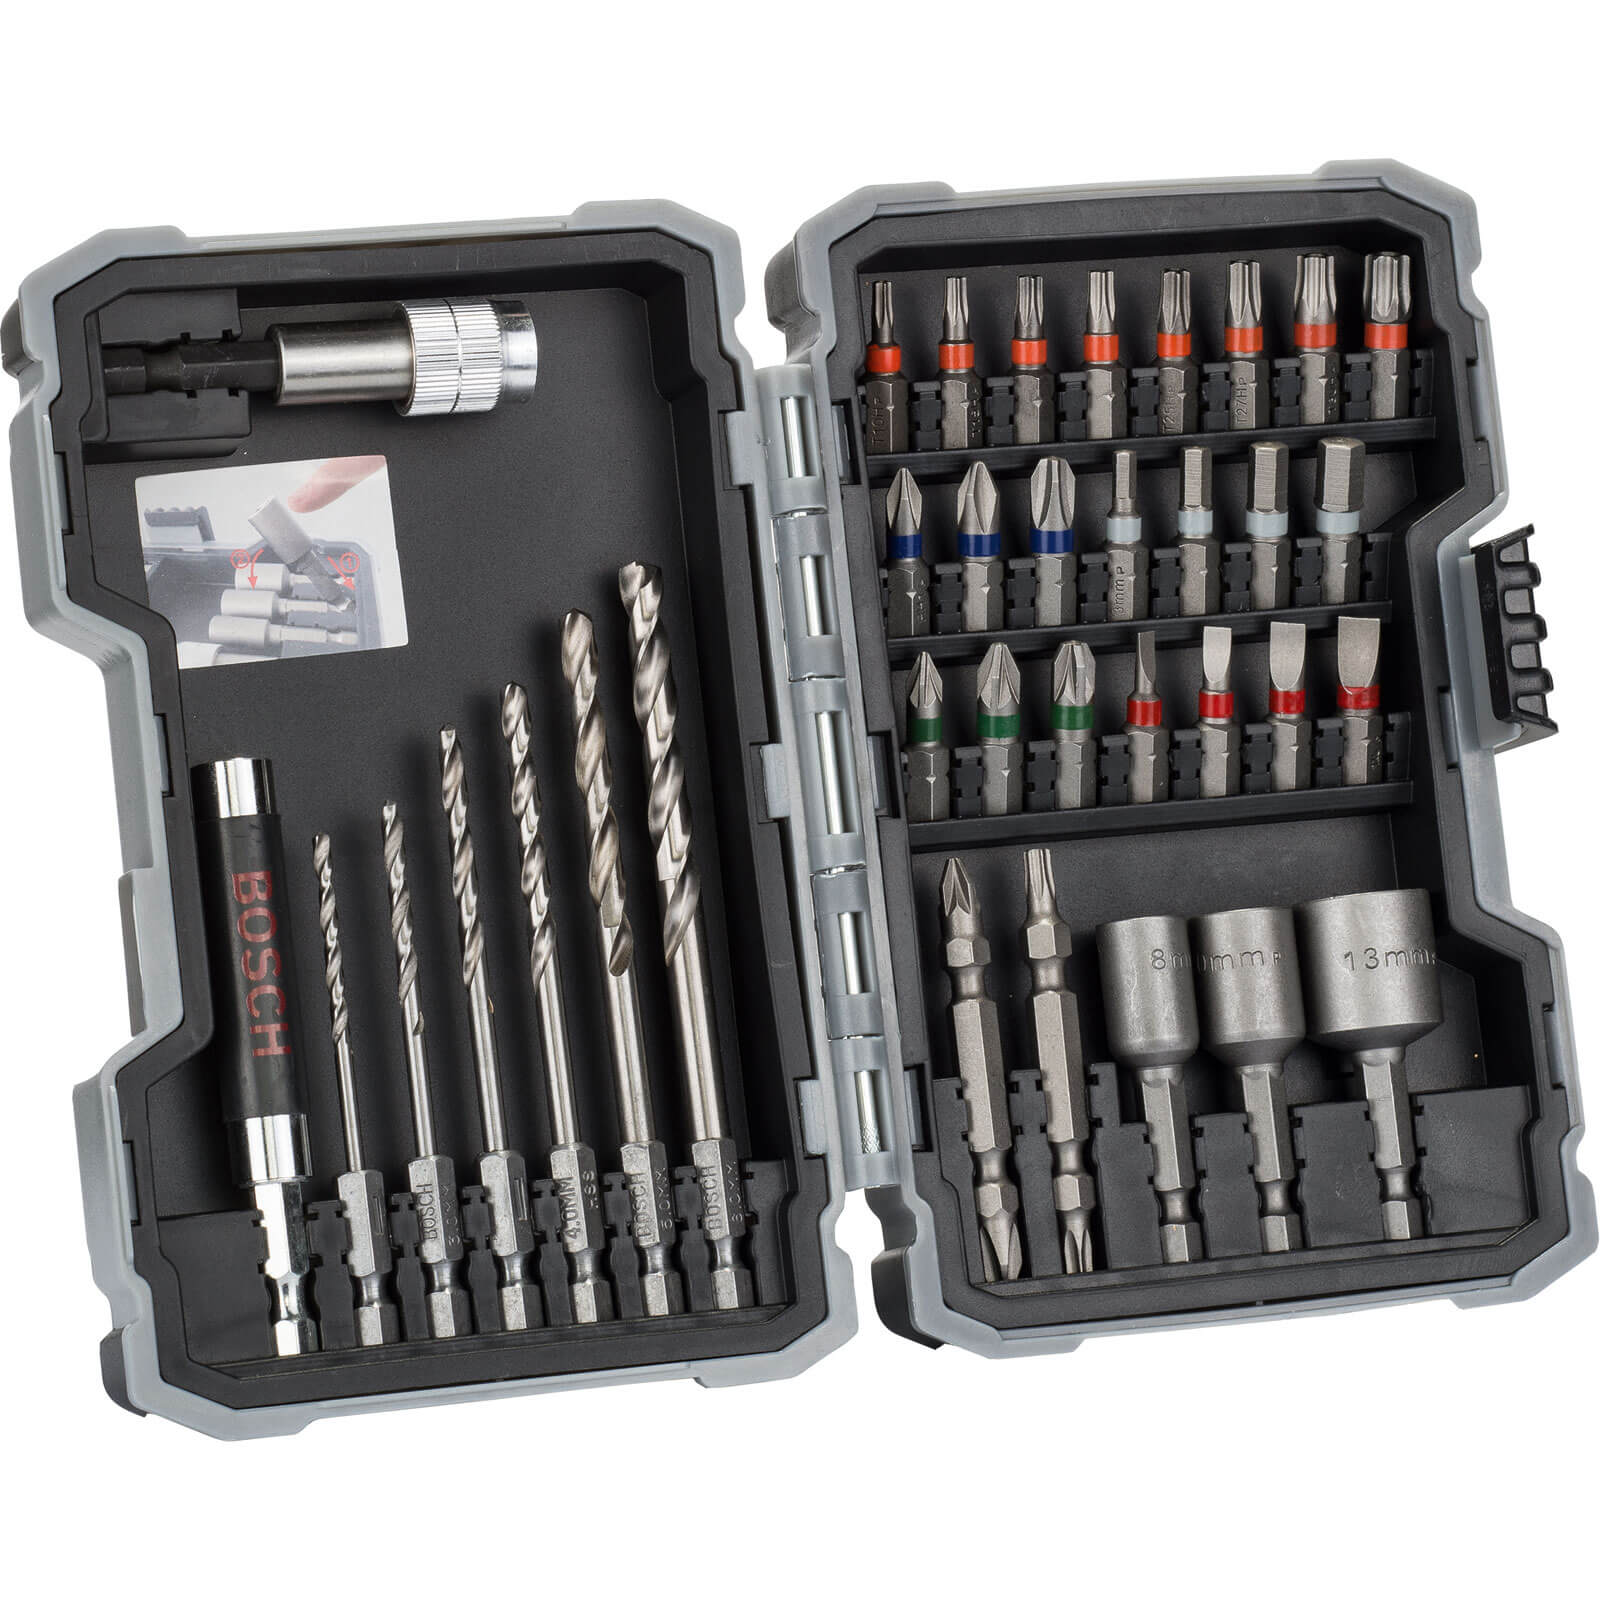 Image of Bosch 35 Piece Drill and Screwdriver Bit Set for Metal